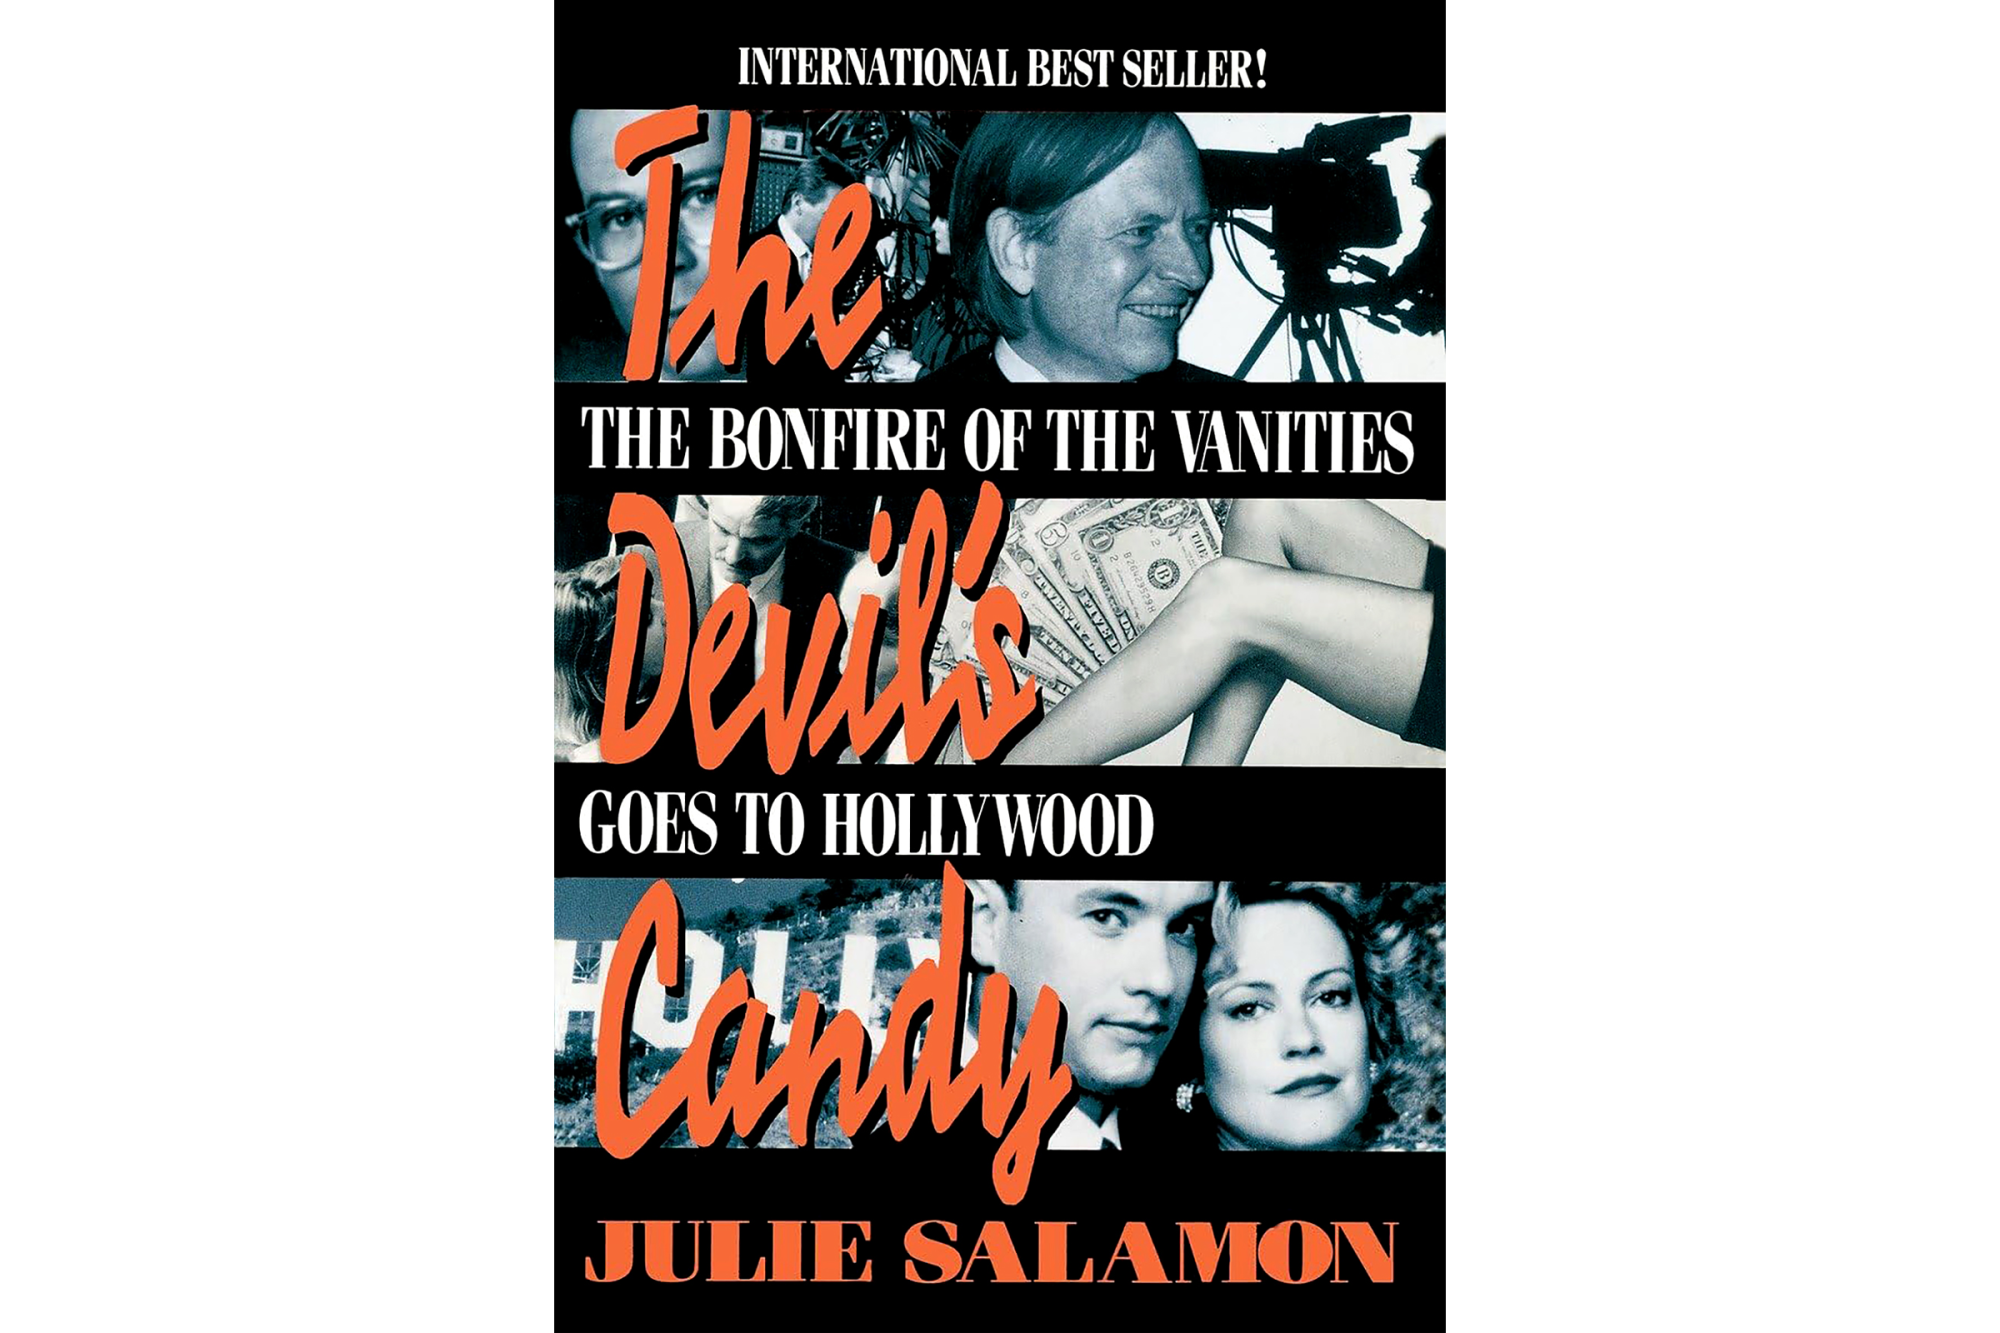 "The Devil's Candy: The Bonfire of the Vanities Goes to Hollywood" by Julie Salamon